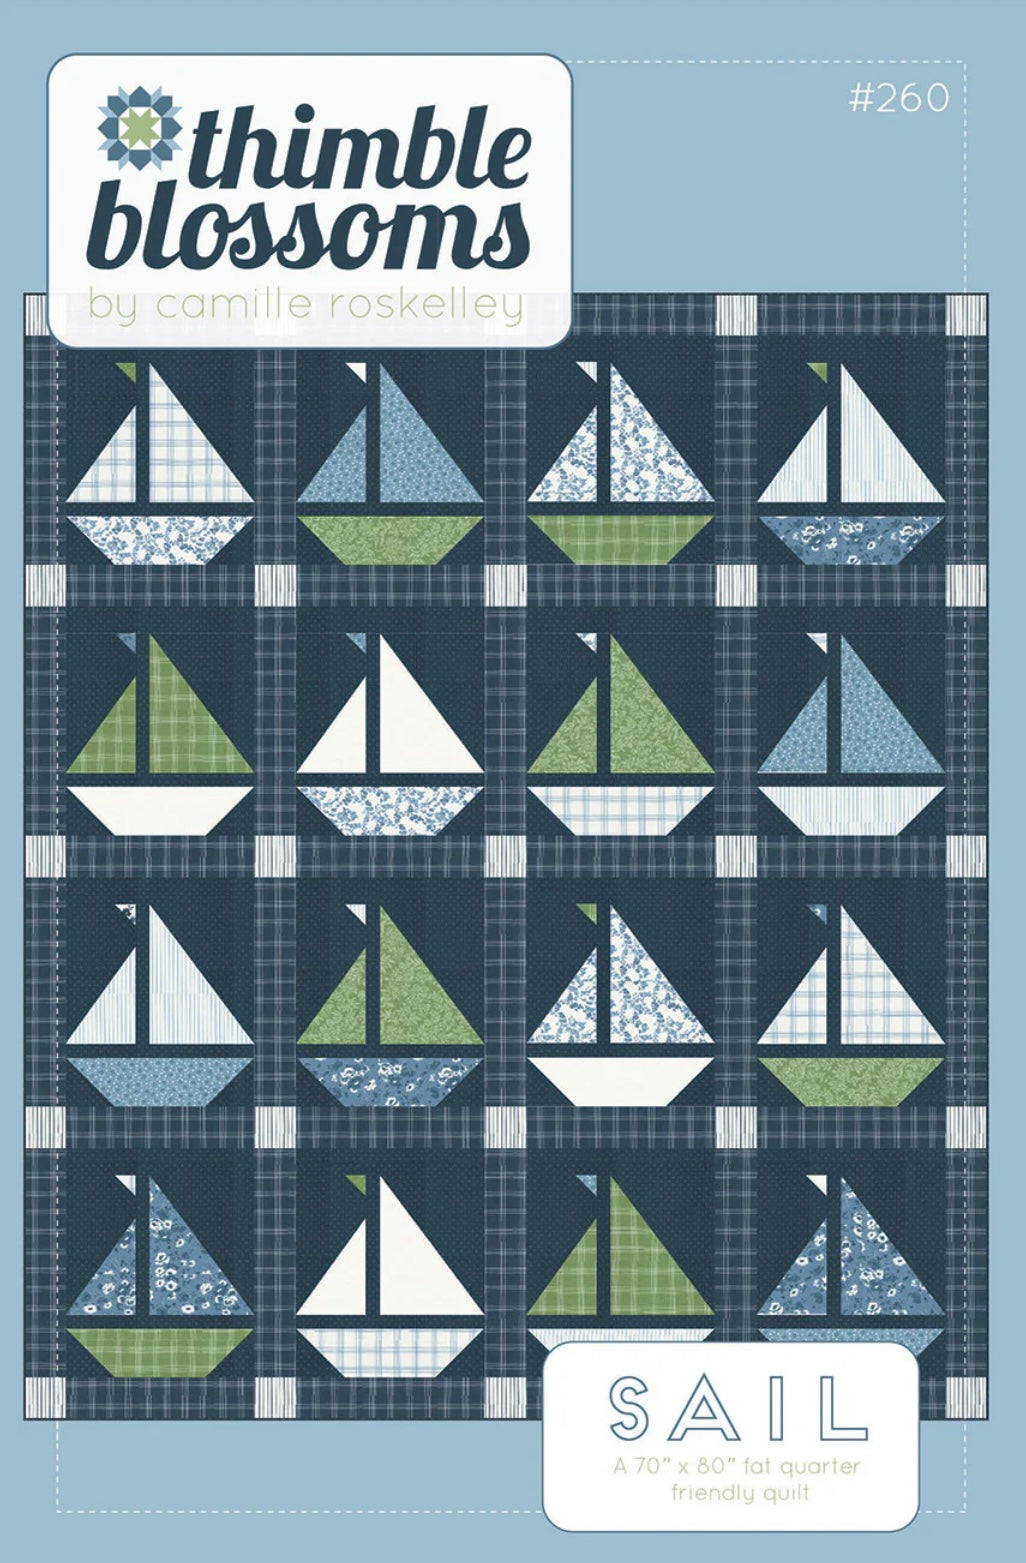 Sail Quilt Kit - Pattern by Camille Roskelley of Thimbleblossoms